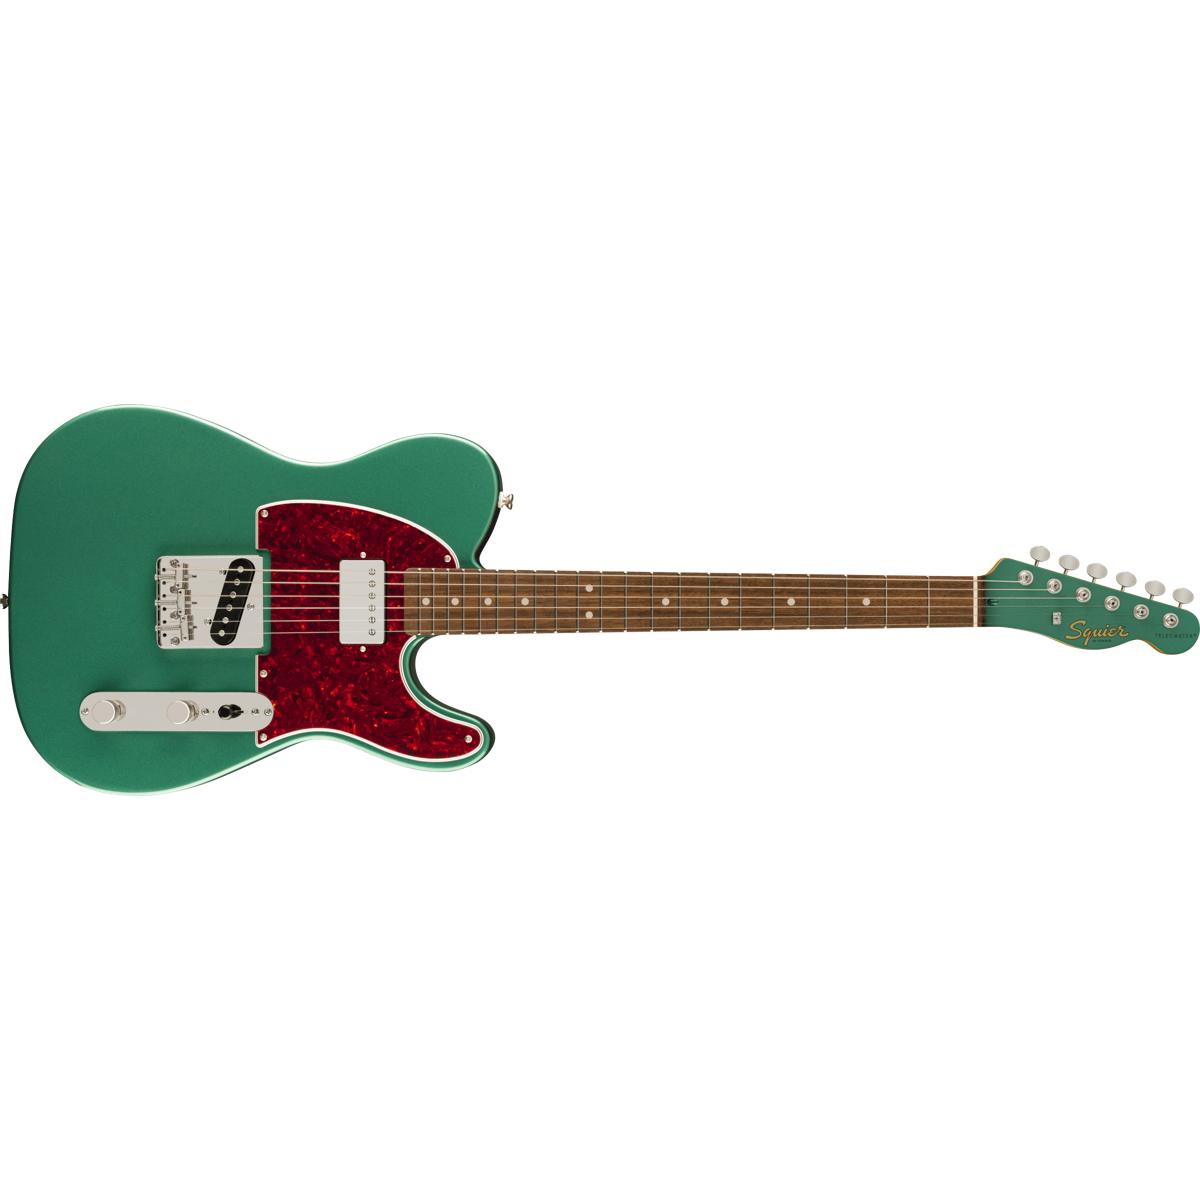 Fender Squier Classic Vibe Limited Edition 60s Telecaster SH Sherwood Green - 0374044546